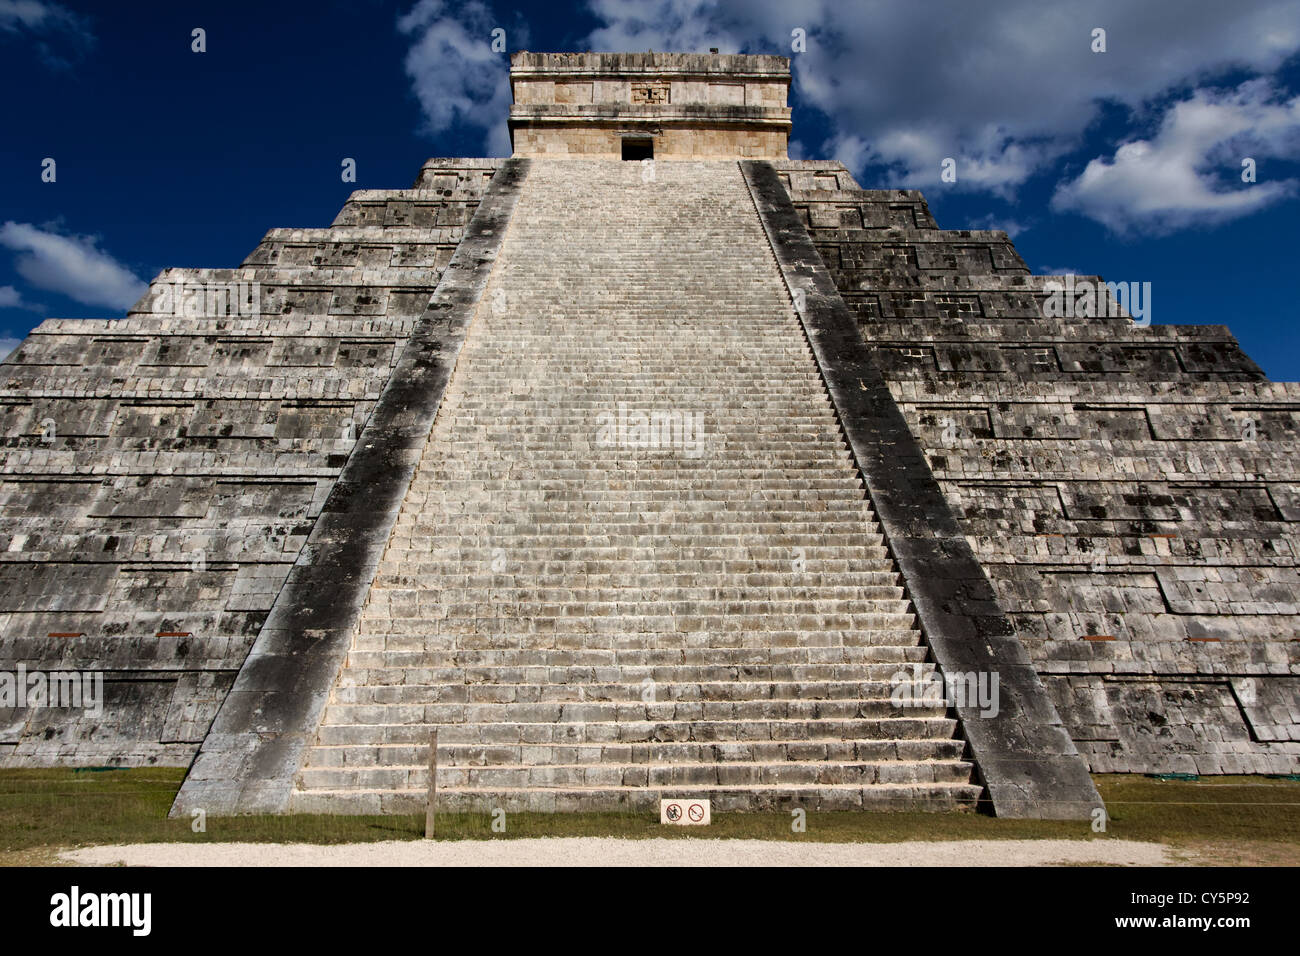 View up the stairs of El Castillo, the Mayan Pyramid to the god Kukulkan, the feathered serpent, at Chichen Itza, Mexico. Stock Photo